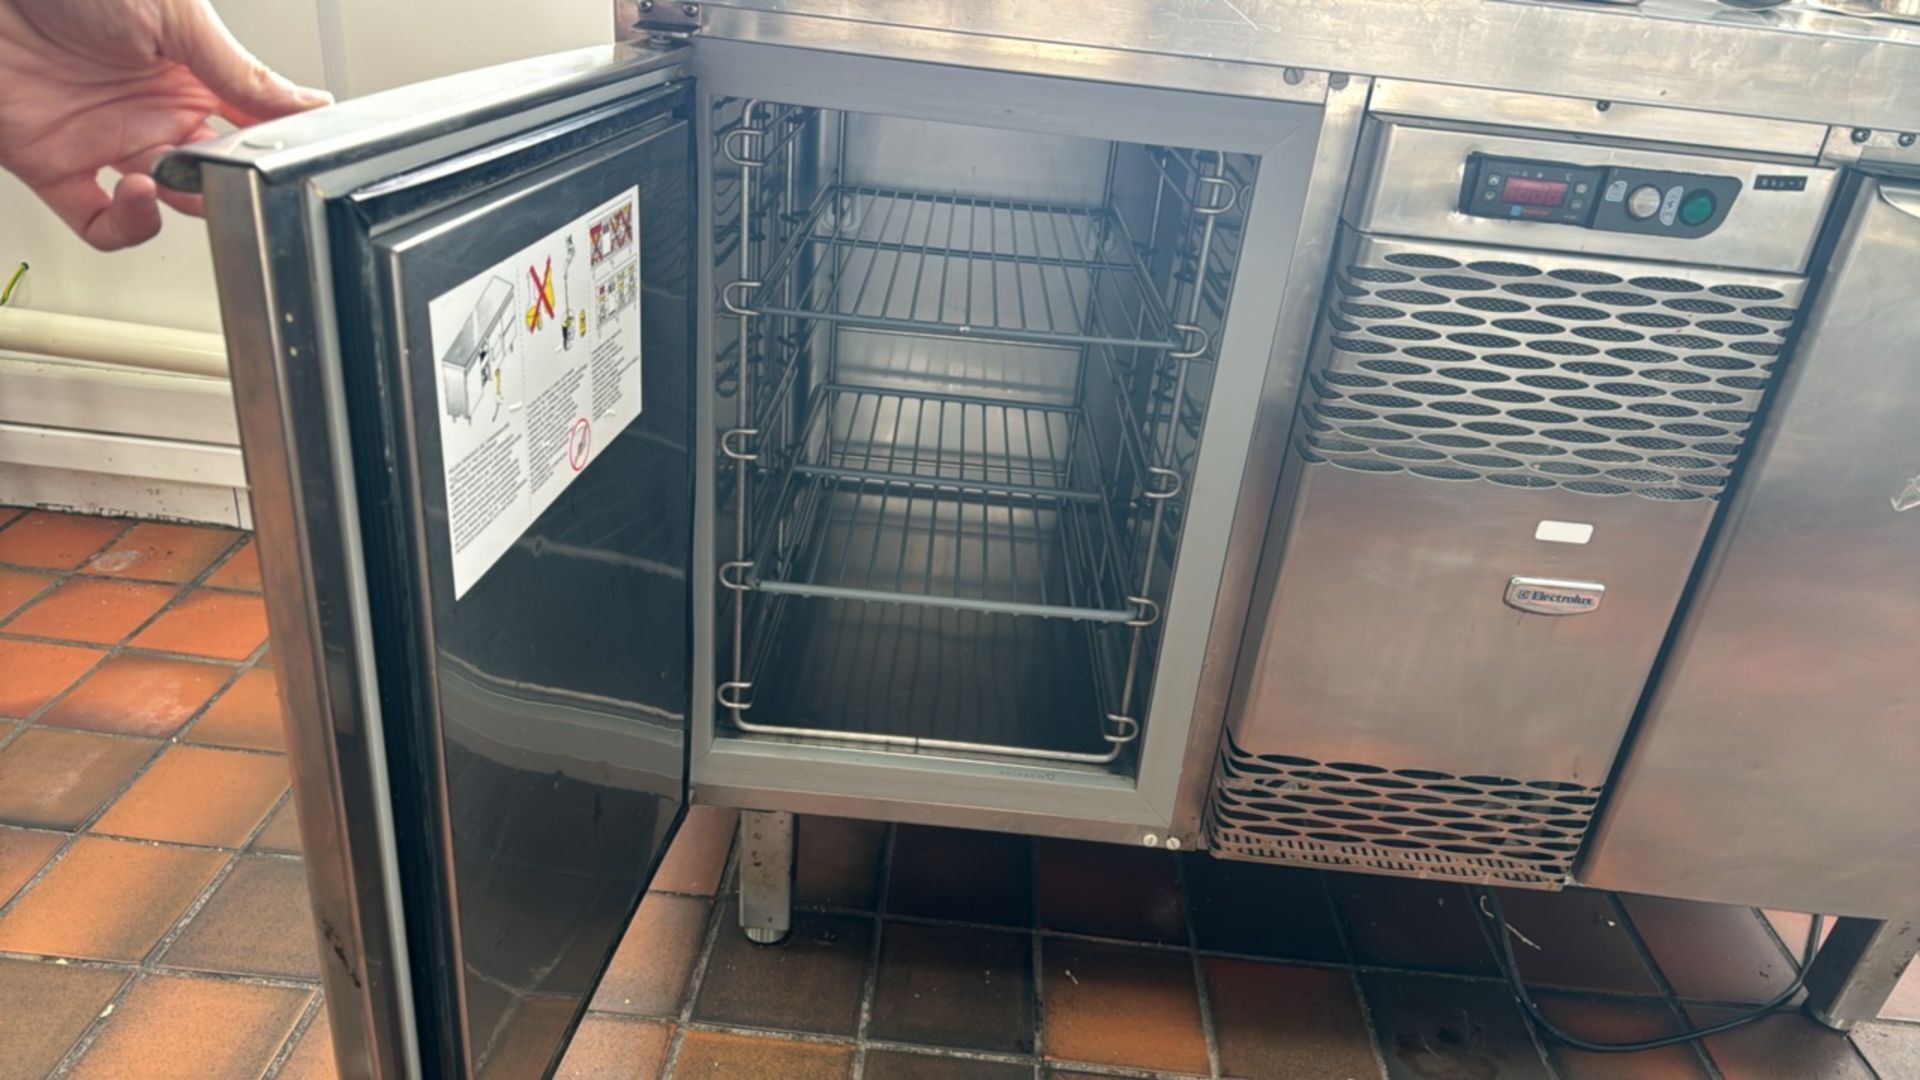 Electrolux Stainless Steel Preparation Unit With Under Counter Fridges - Image 4 of 6